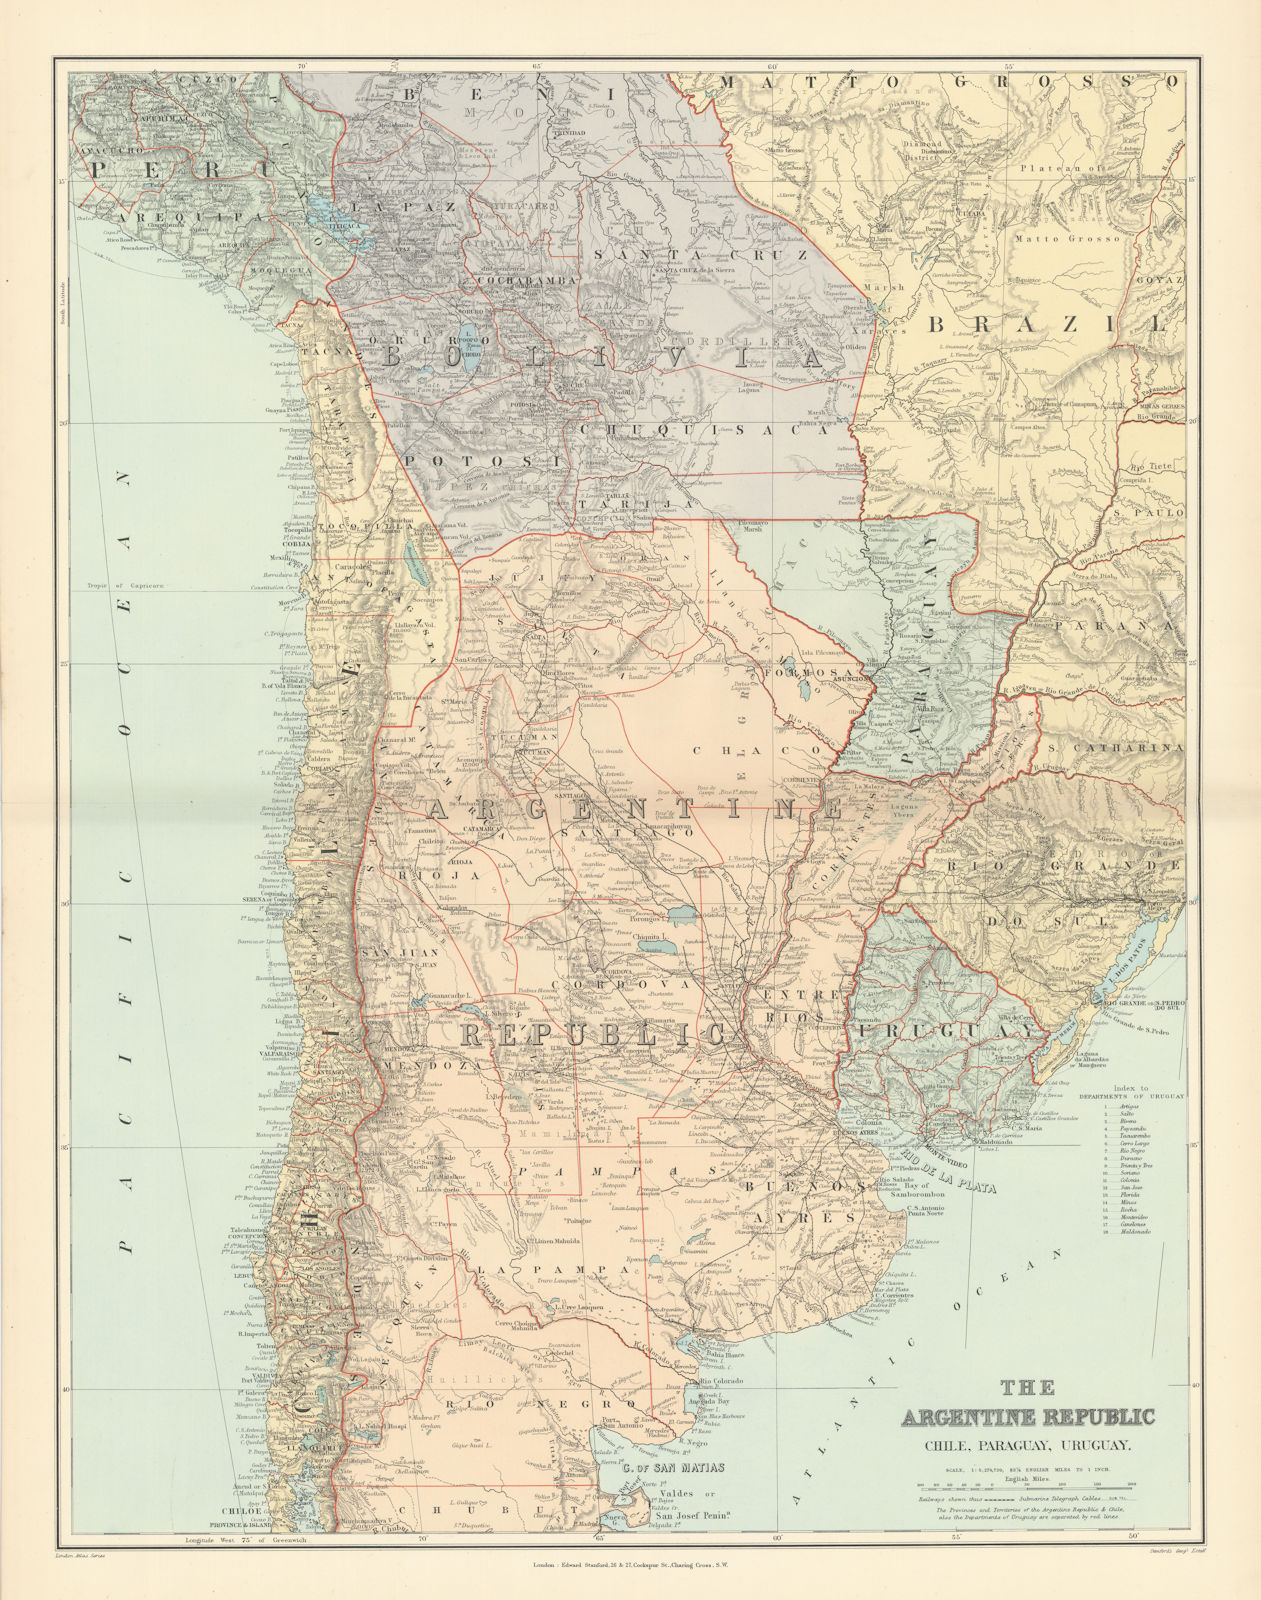 Associate Product Argentine Republic, Chile, Paraguay & Uruguay. South America. STANFORD 1896 map